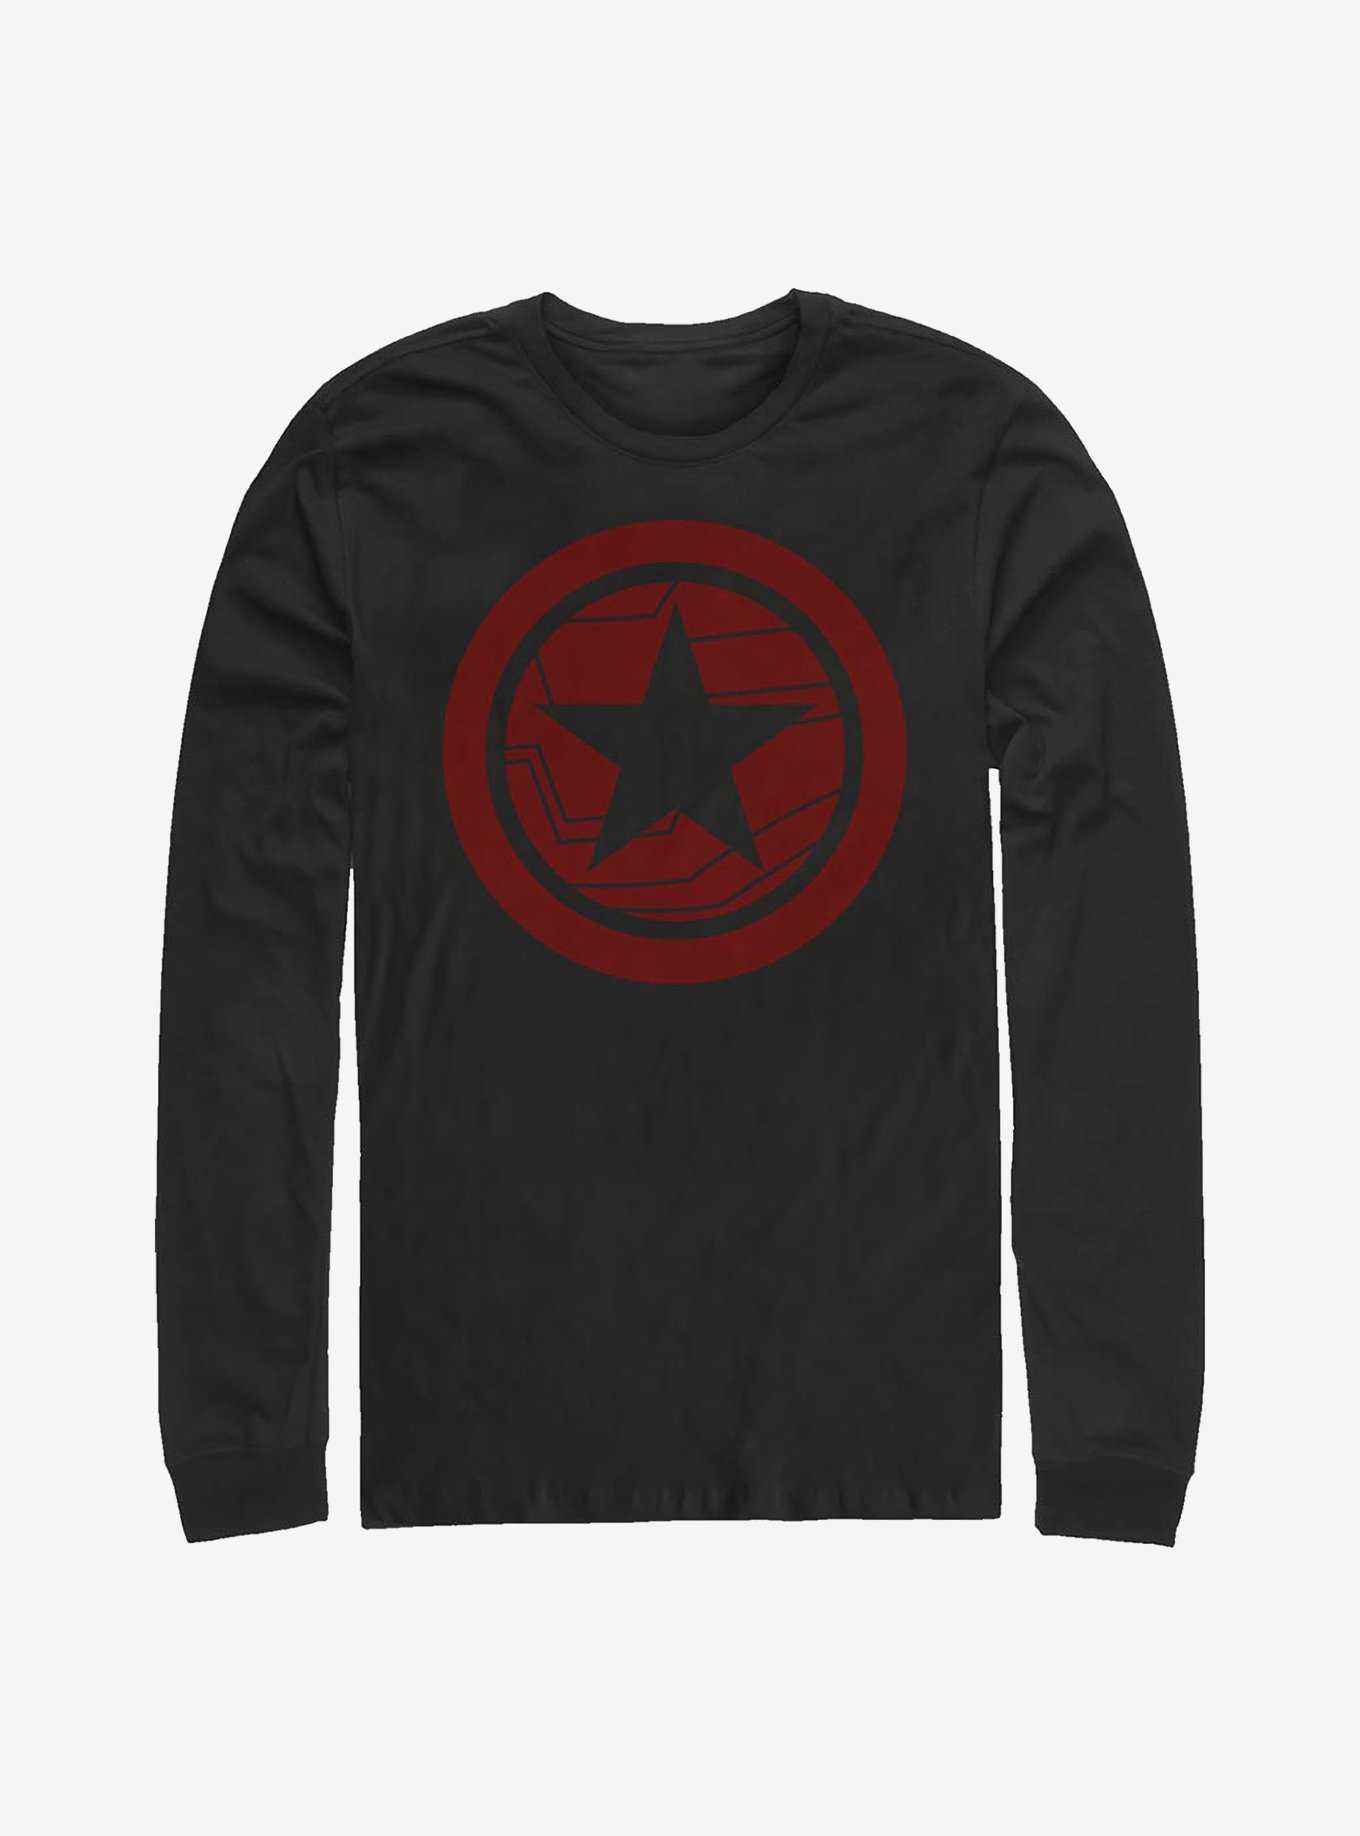 Marvel The Falcon And The Winter Soldier Red Shield Long-Sleeve T-Shirt, , hi-res